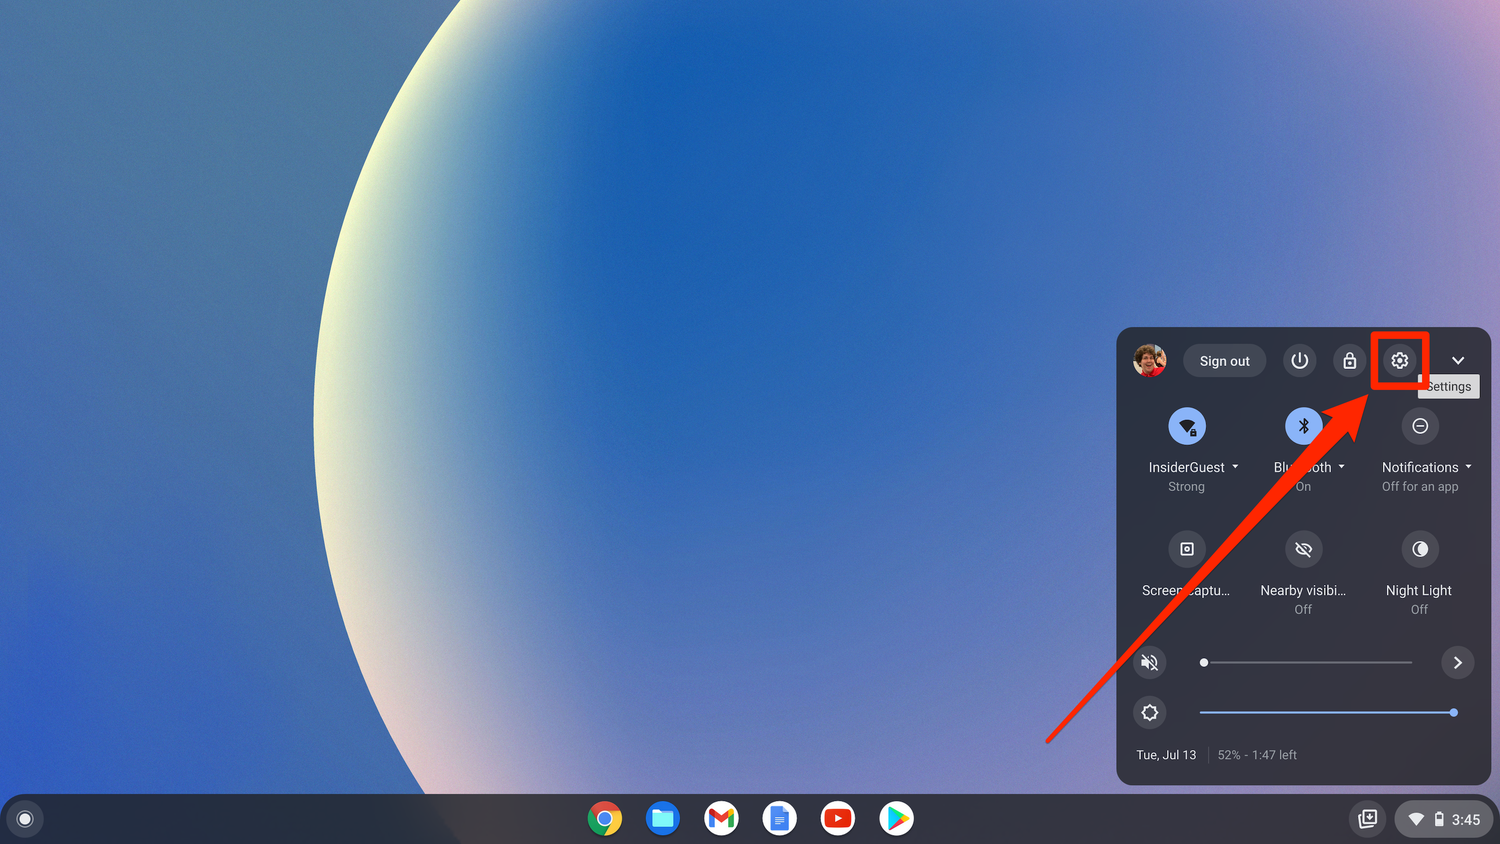 A Chromebook's quick settings menu, with the full settings gear icon highlighted.